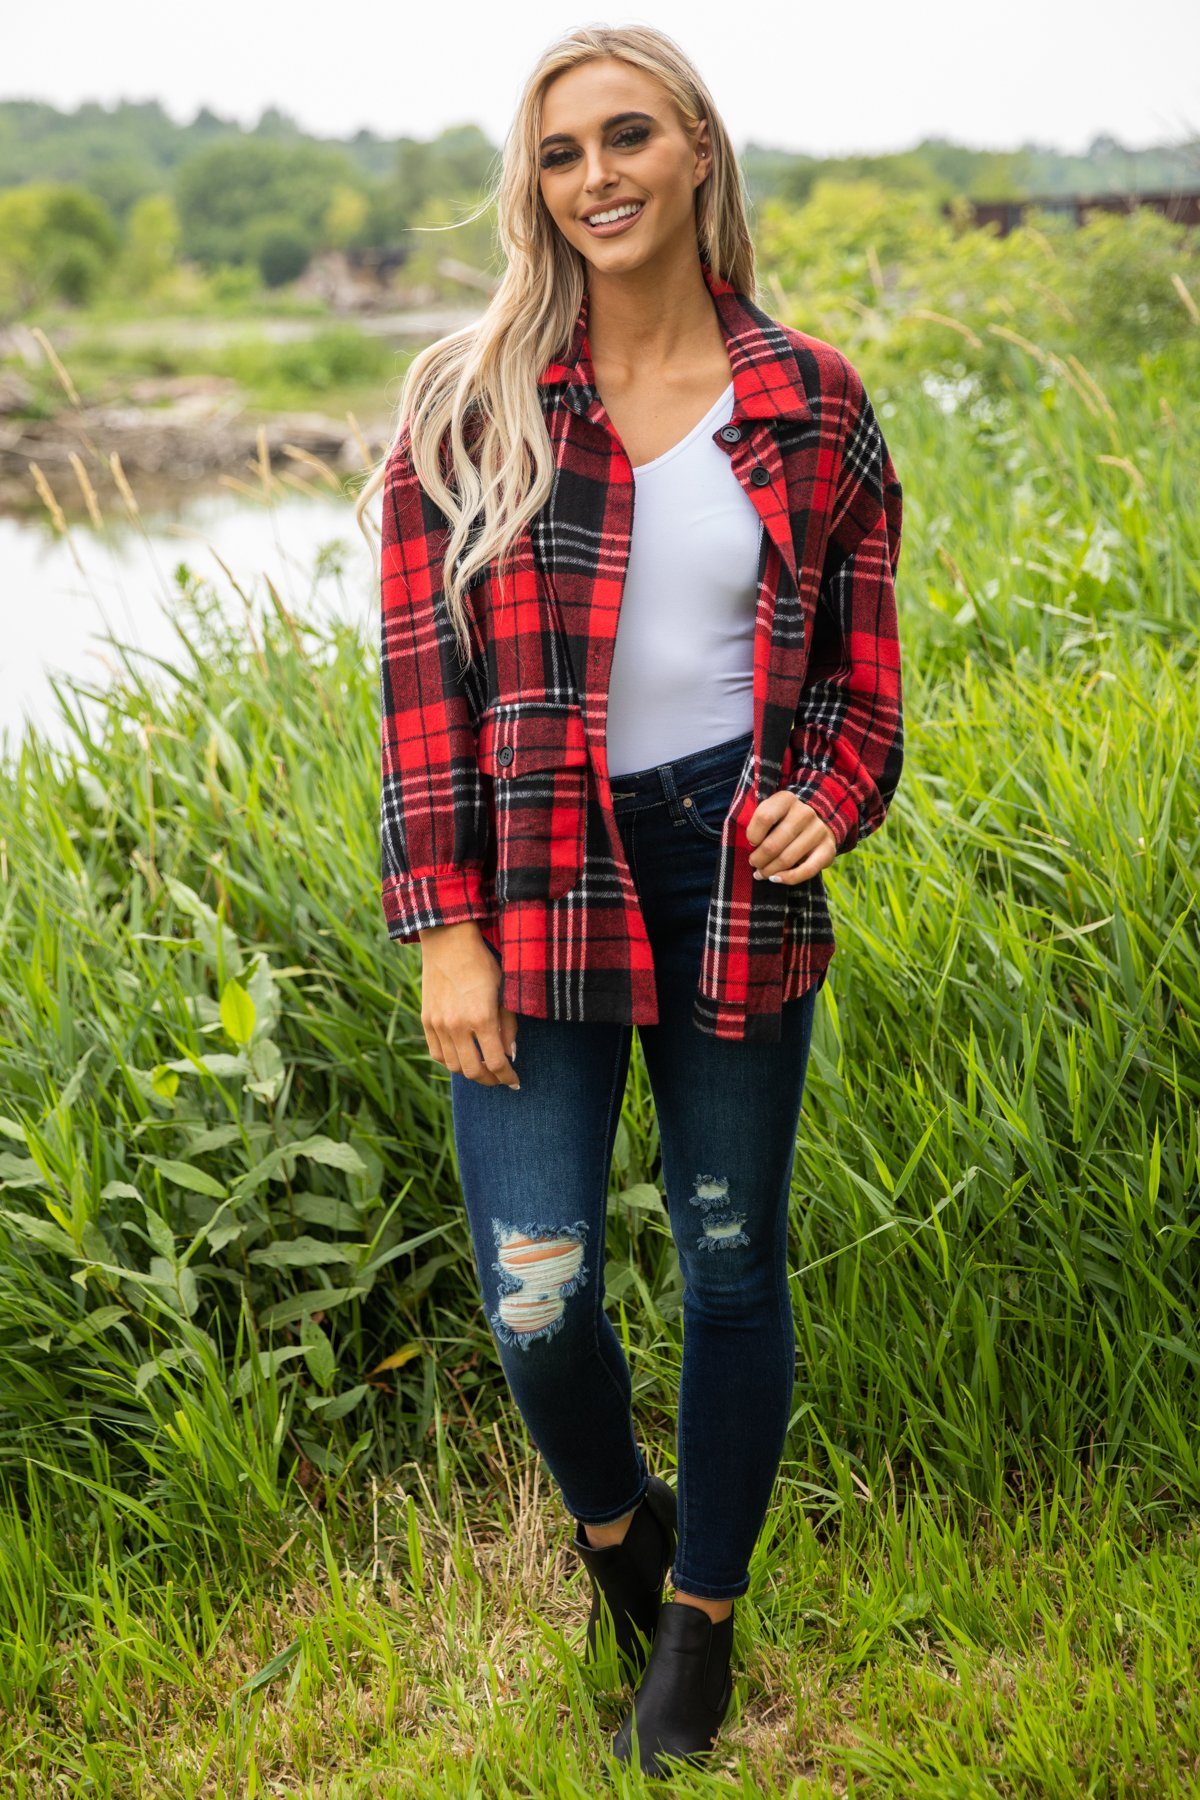 Red and Black Plaid Button Up Top - Filly Flair